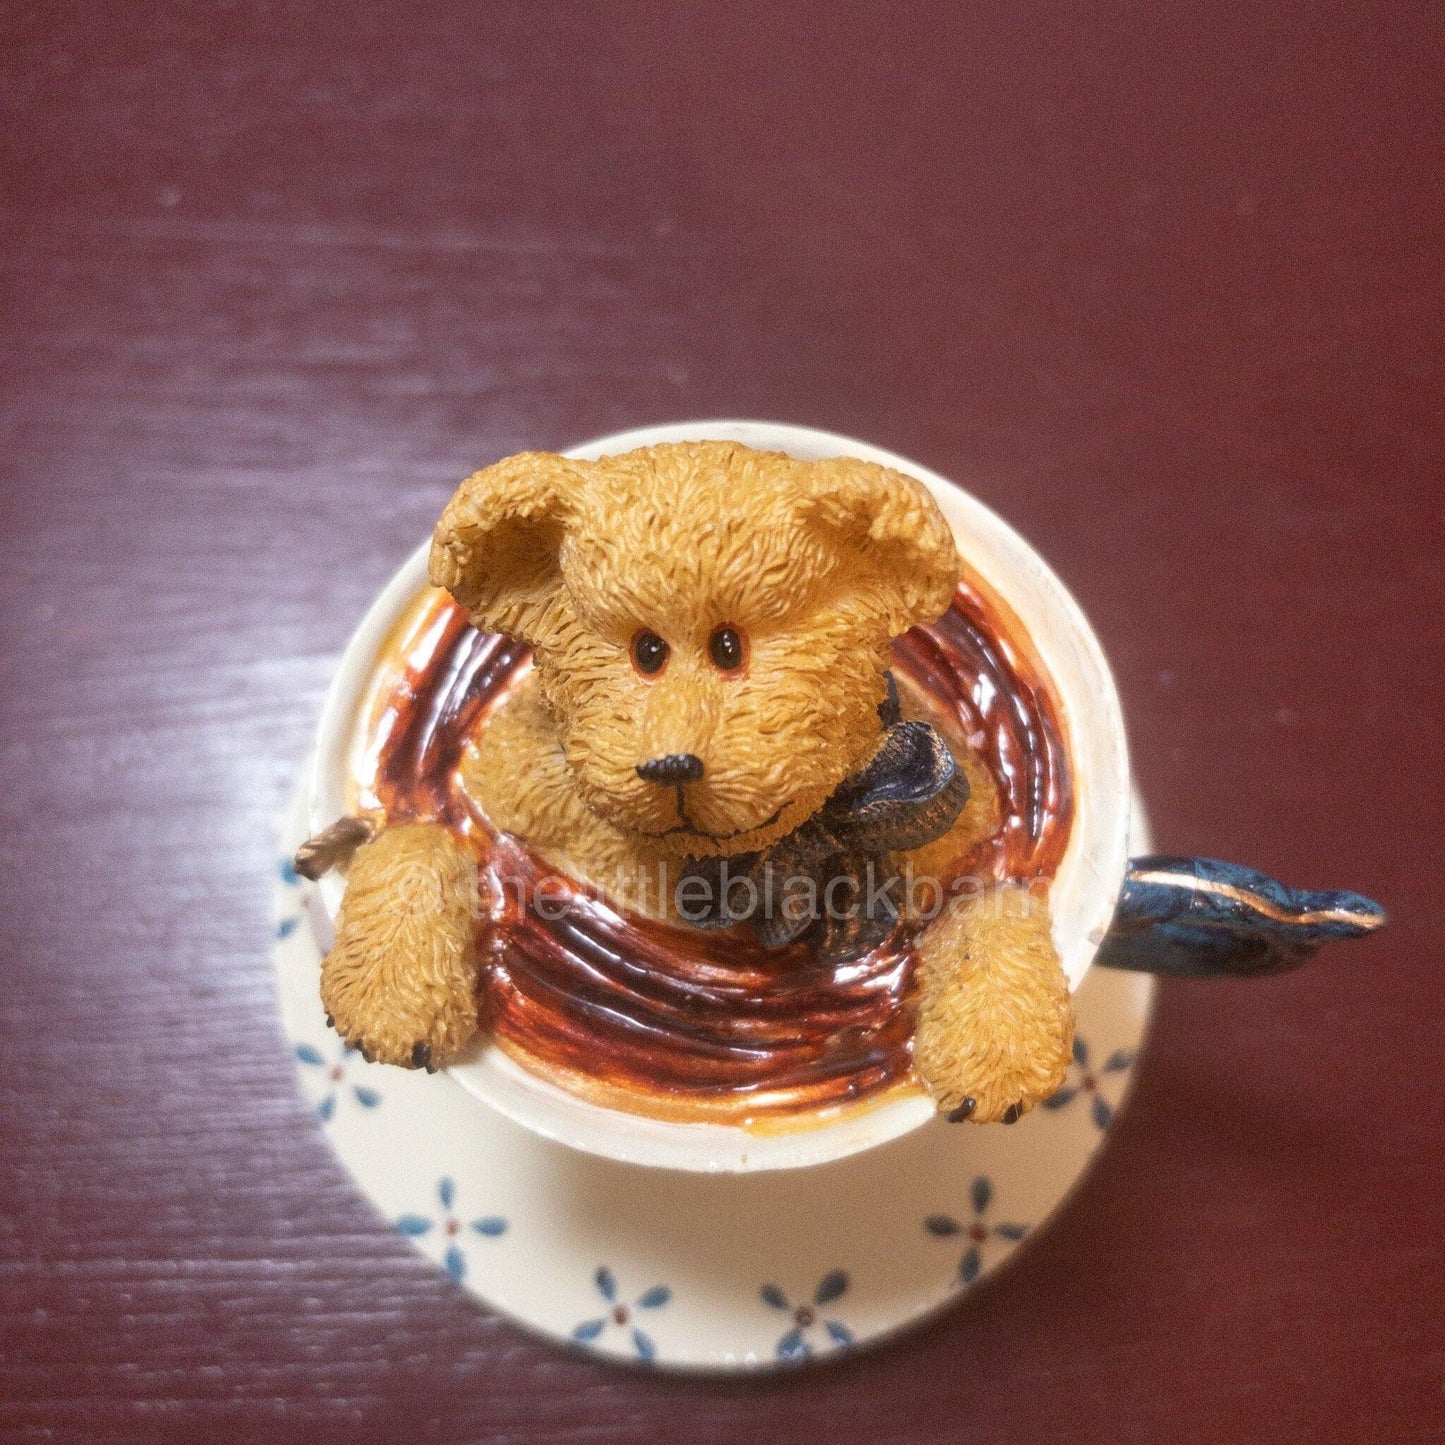 Teaberries, by Boyds Bears, Keep Your Chin Up, Figurine, NIB